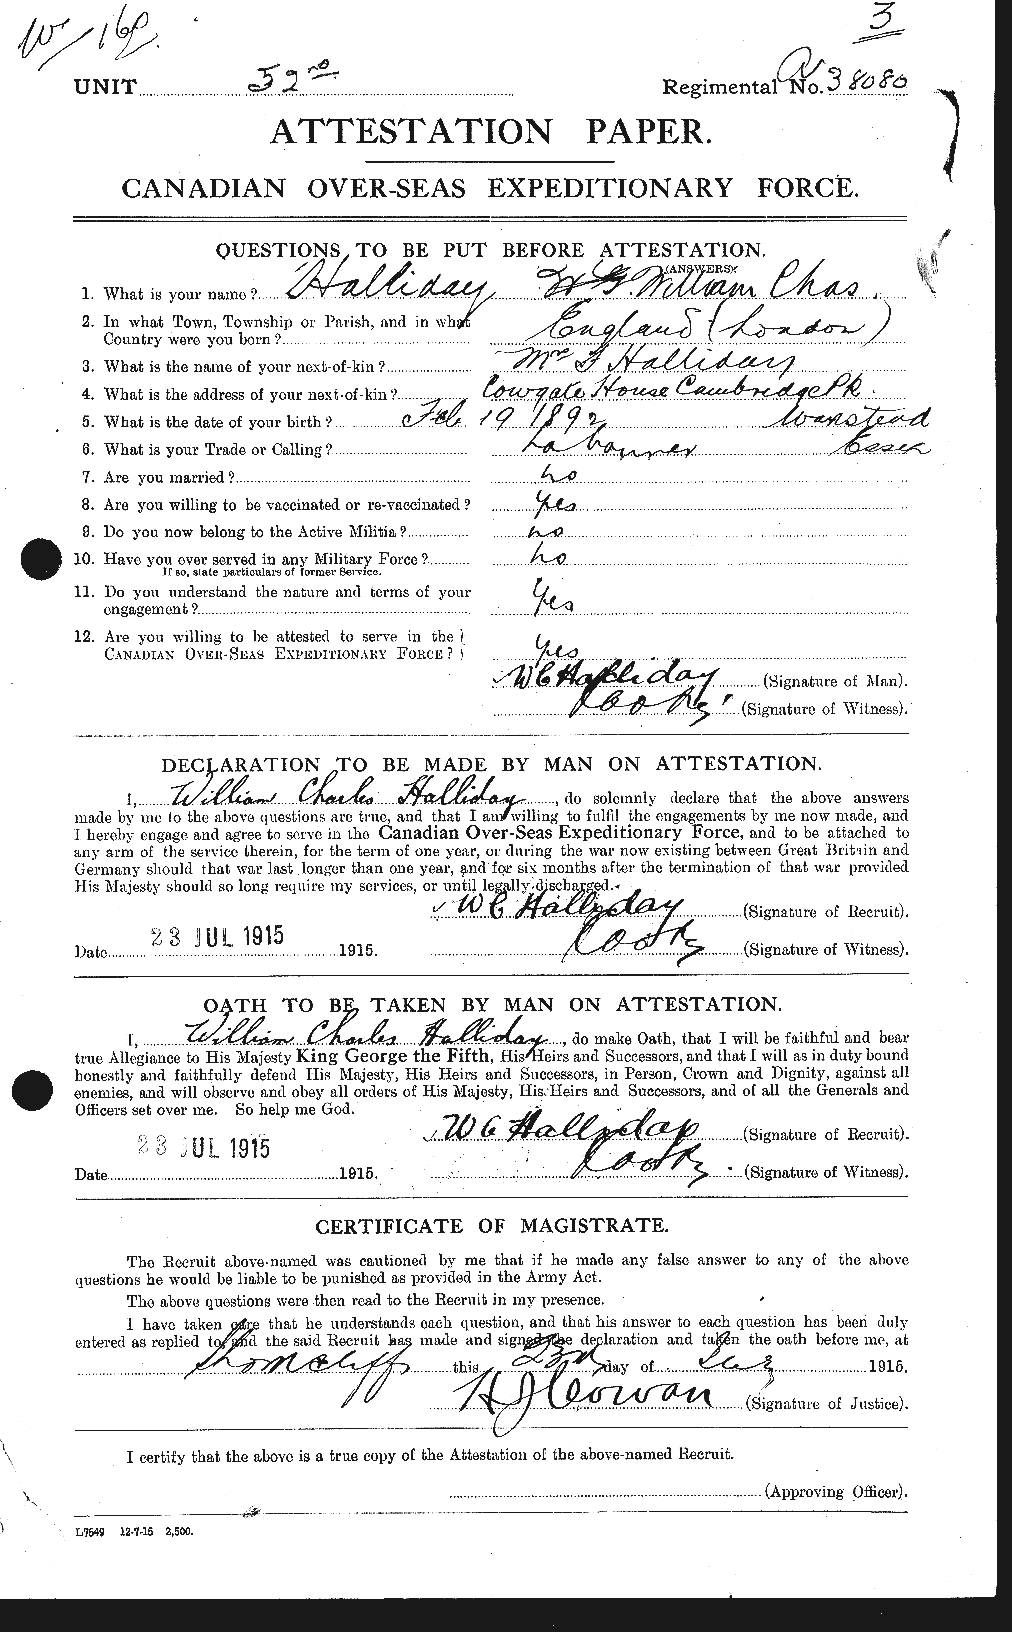 Personnel Records of the First World War - CEF 372280a